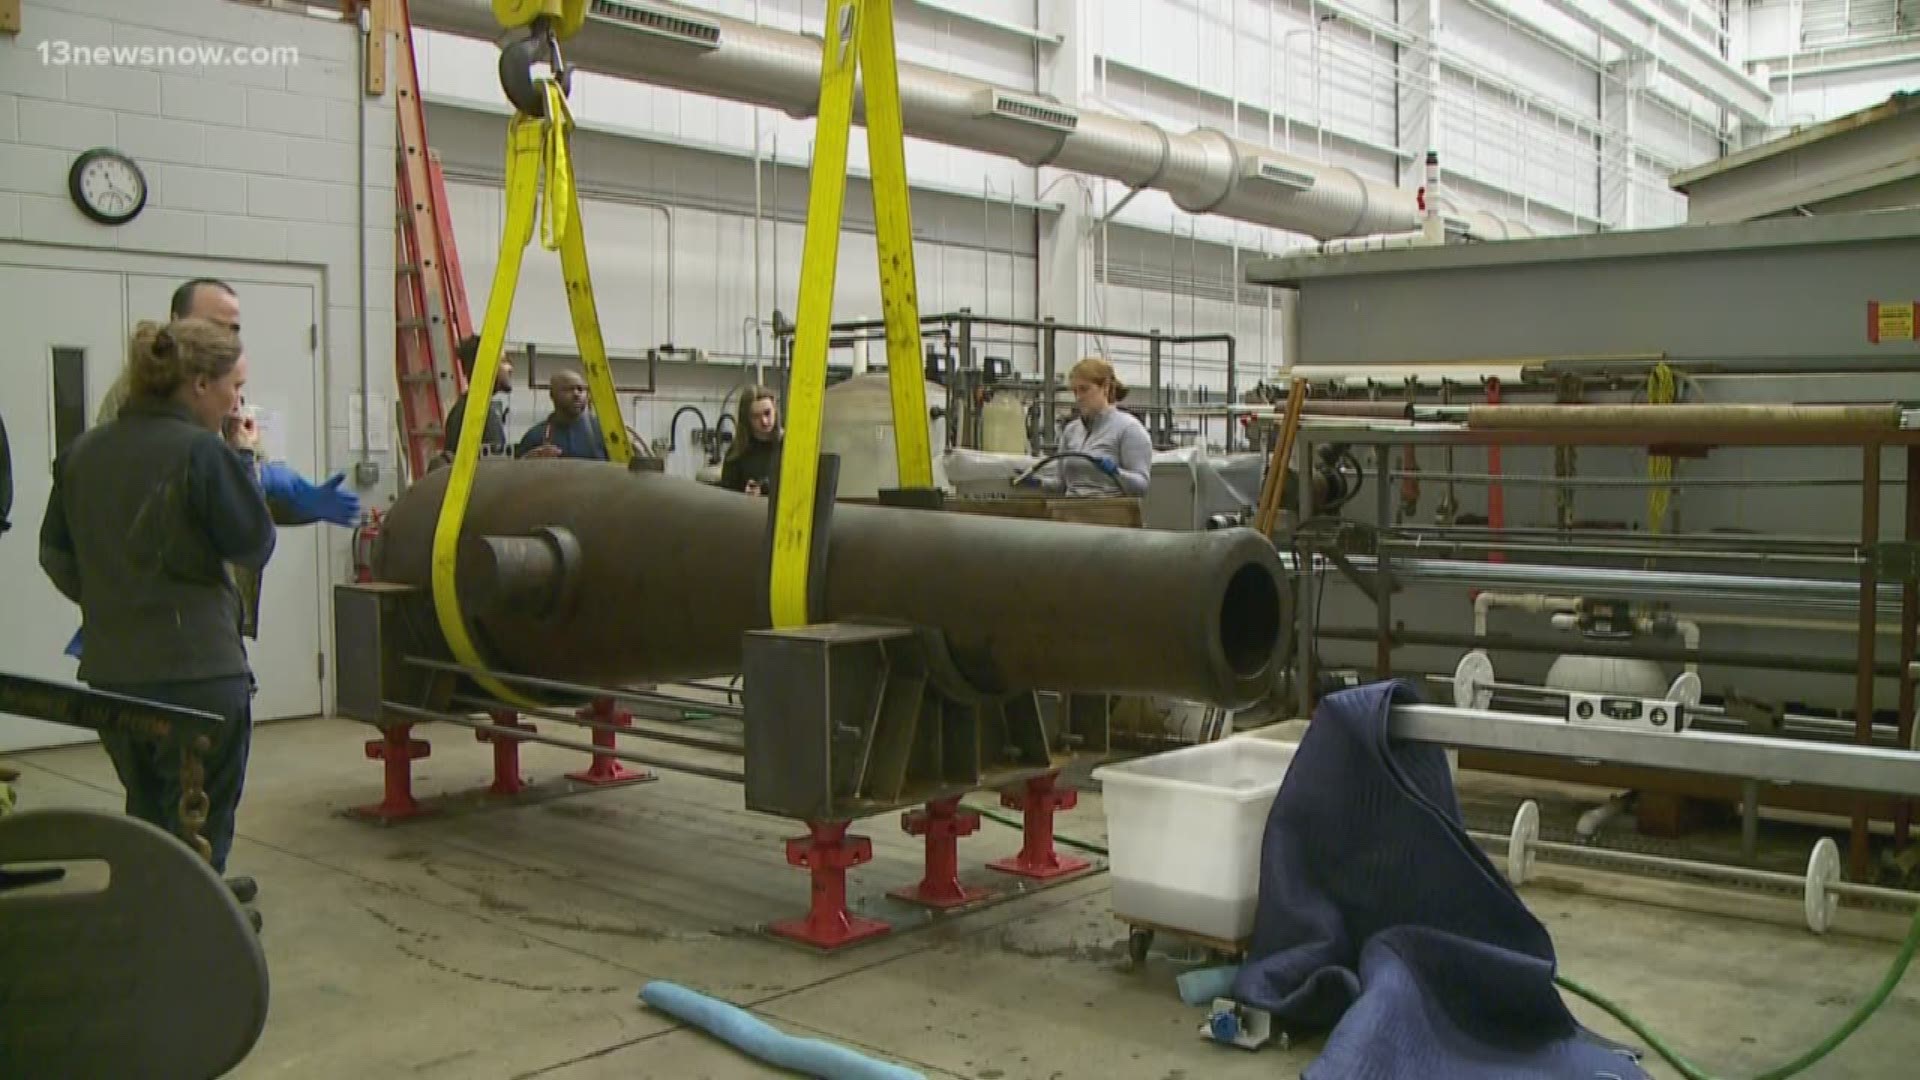 There's work happening to protect a piece of American history in Newport News. Crews are busy working to conserve the USS Monitor's Dahlgren guns.